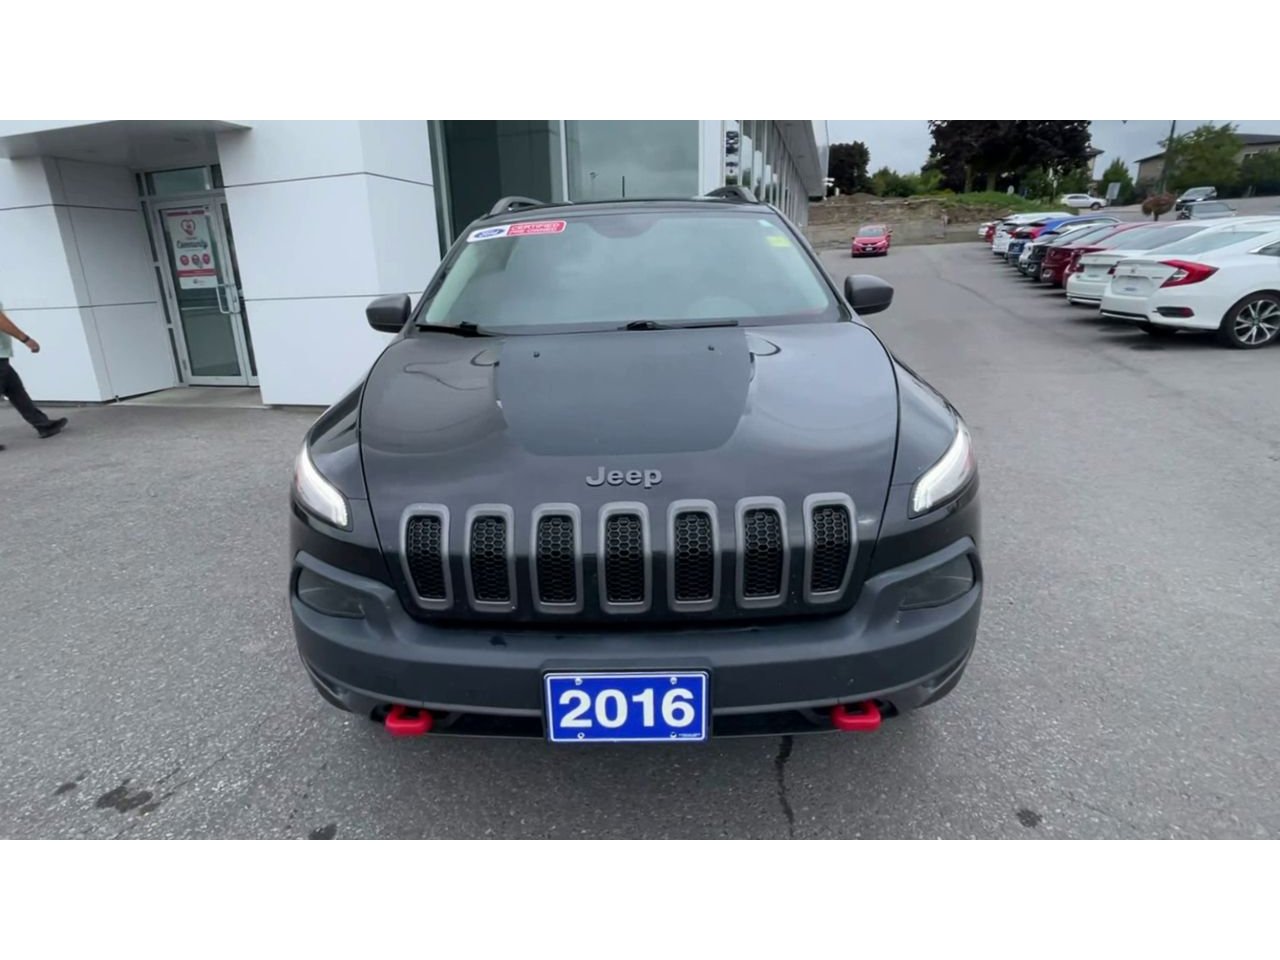 2016 Jeep Cherokee - P21241A Full Image 3